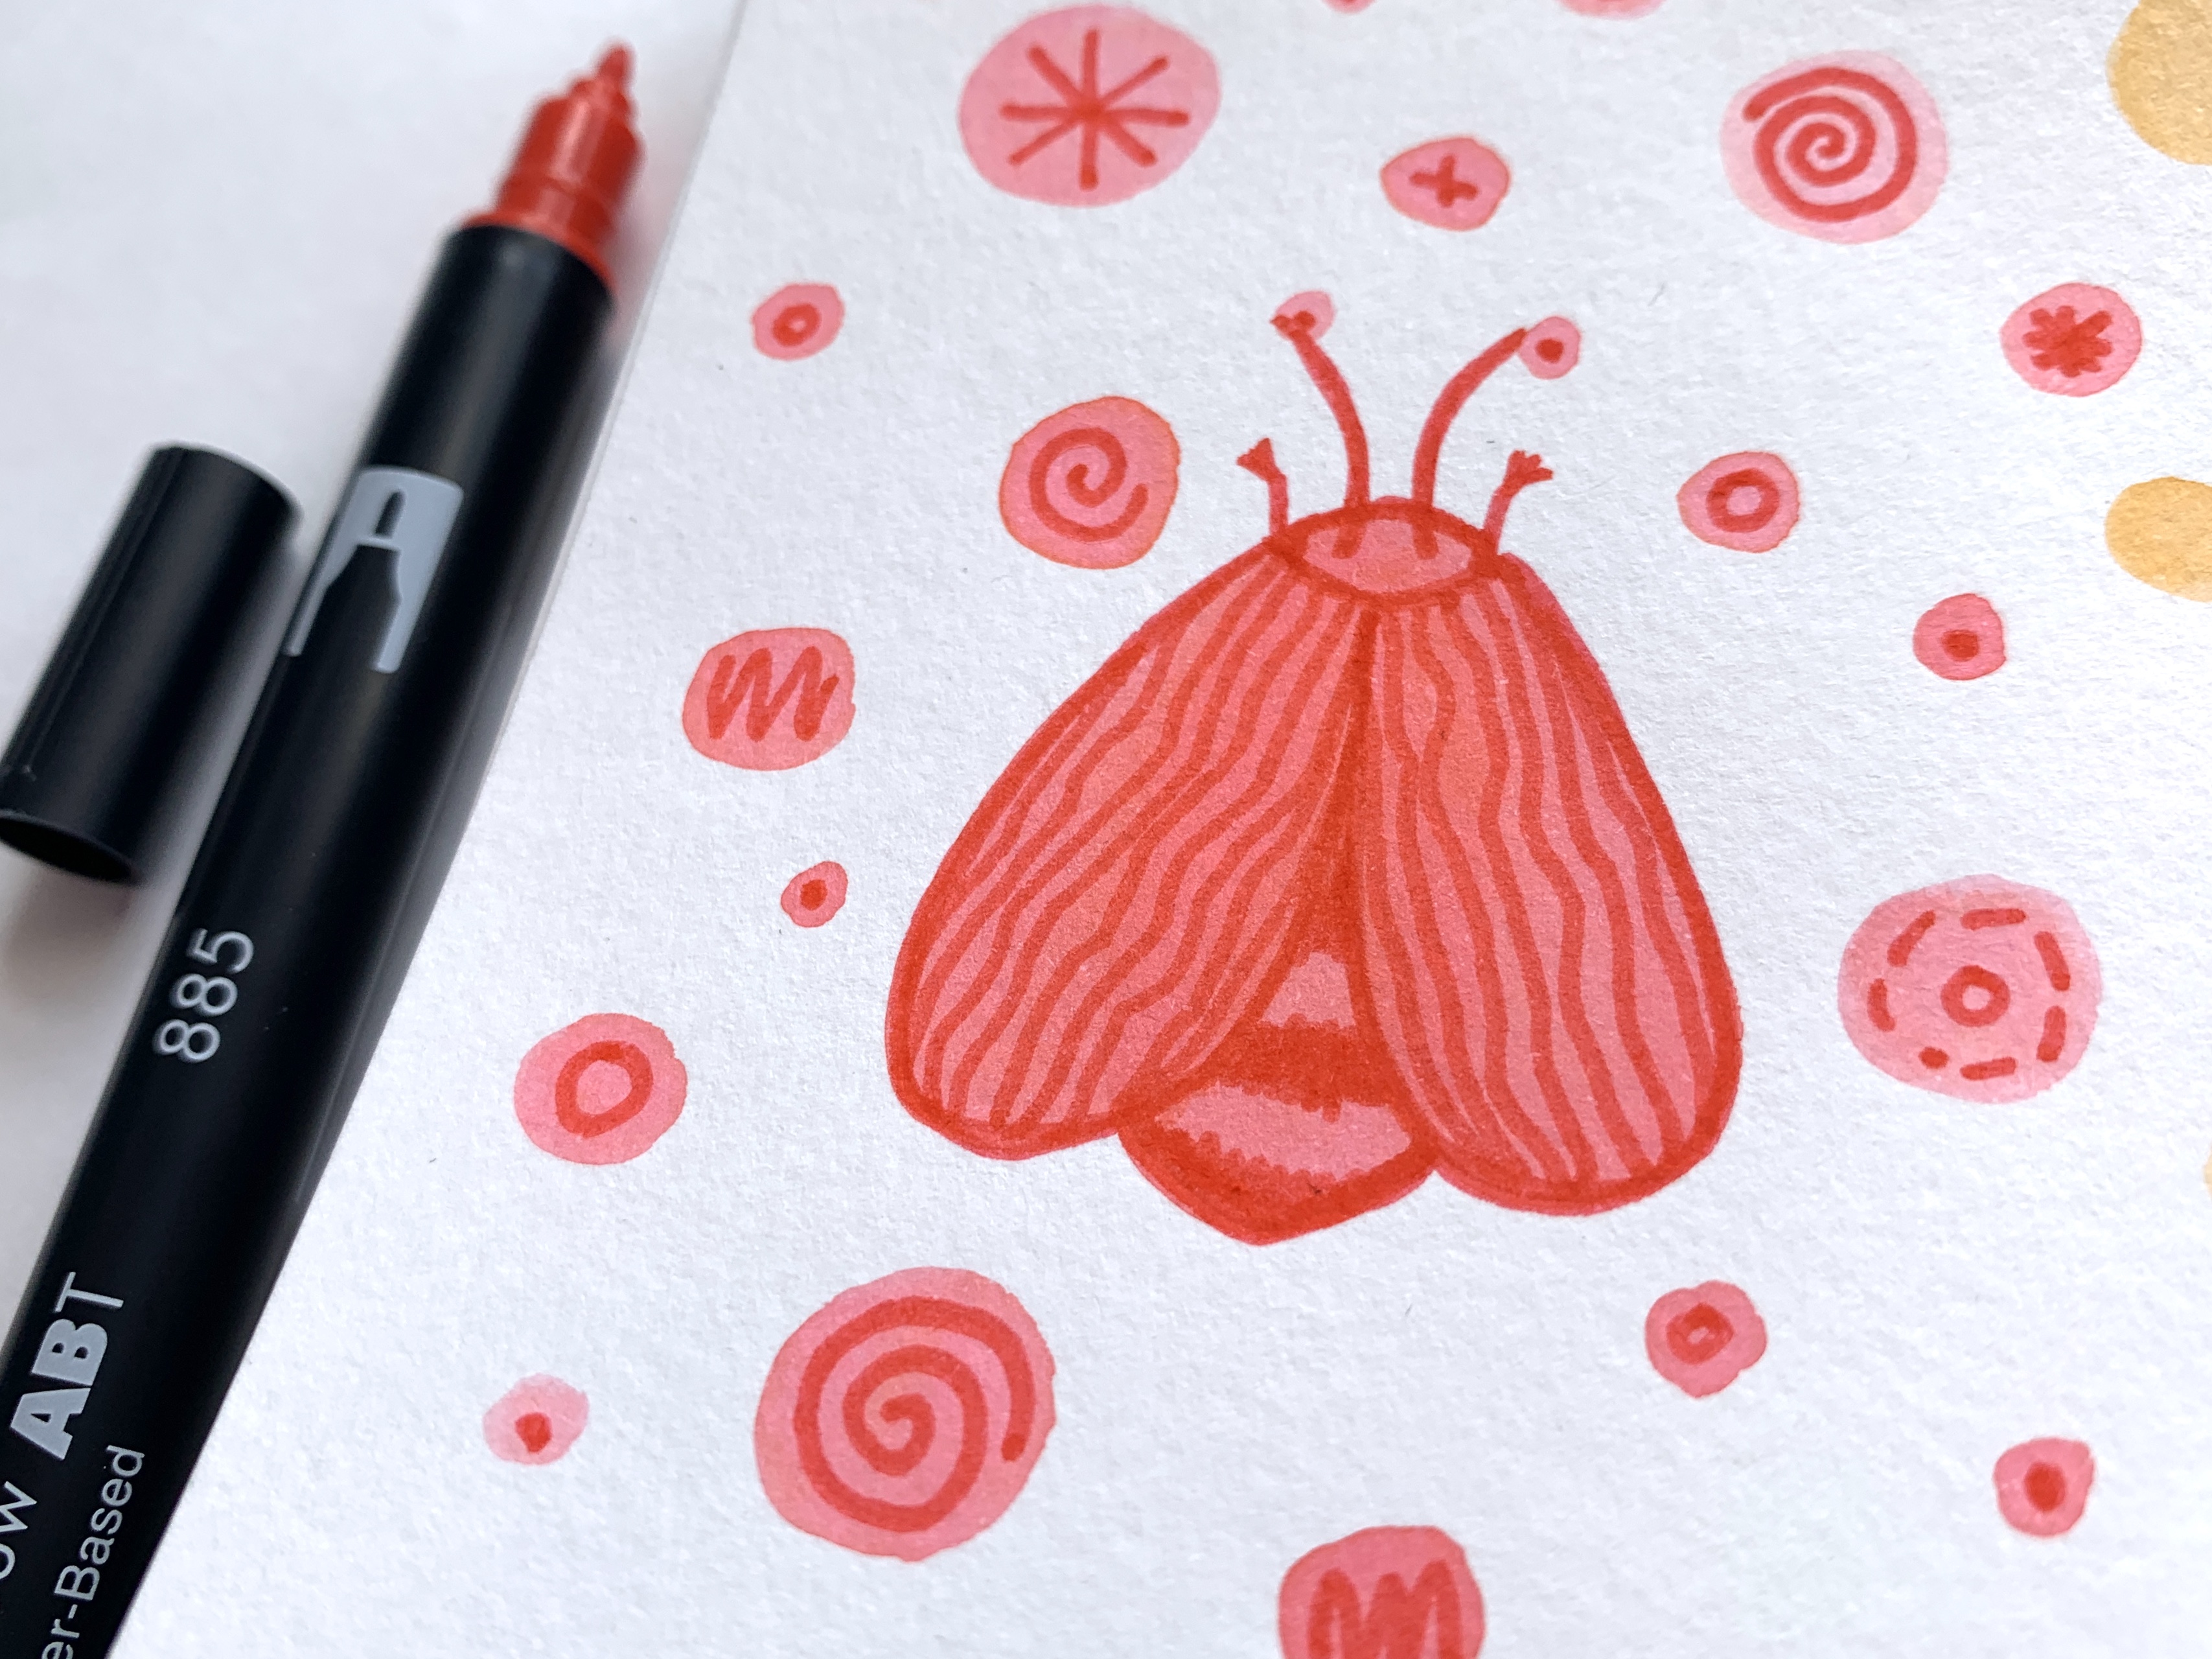 The @TombowUSA Dual Brush Pens are perfect for making simple, but beautiful watercolor projects! Tutorial by @LePereLetters. #DualBrushPens #Mothart #artprojectideas